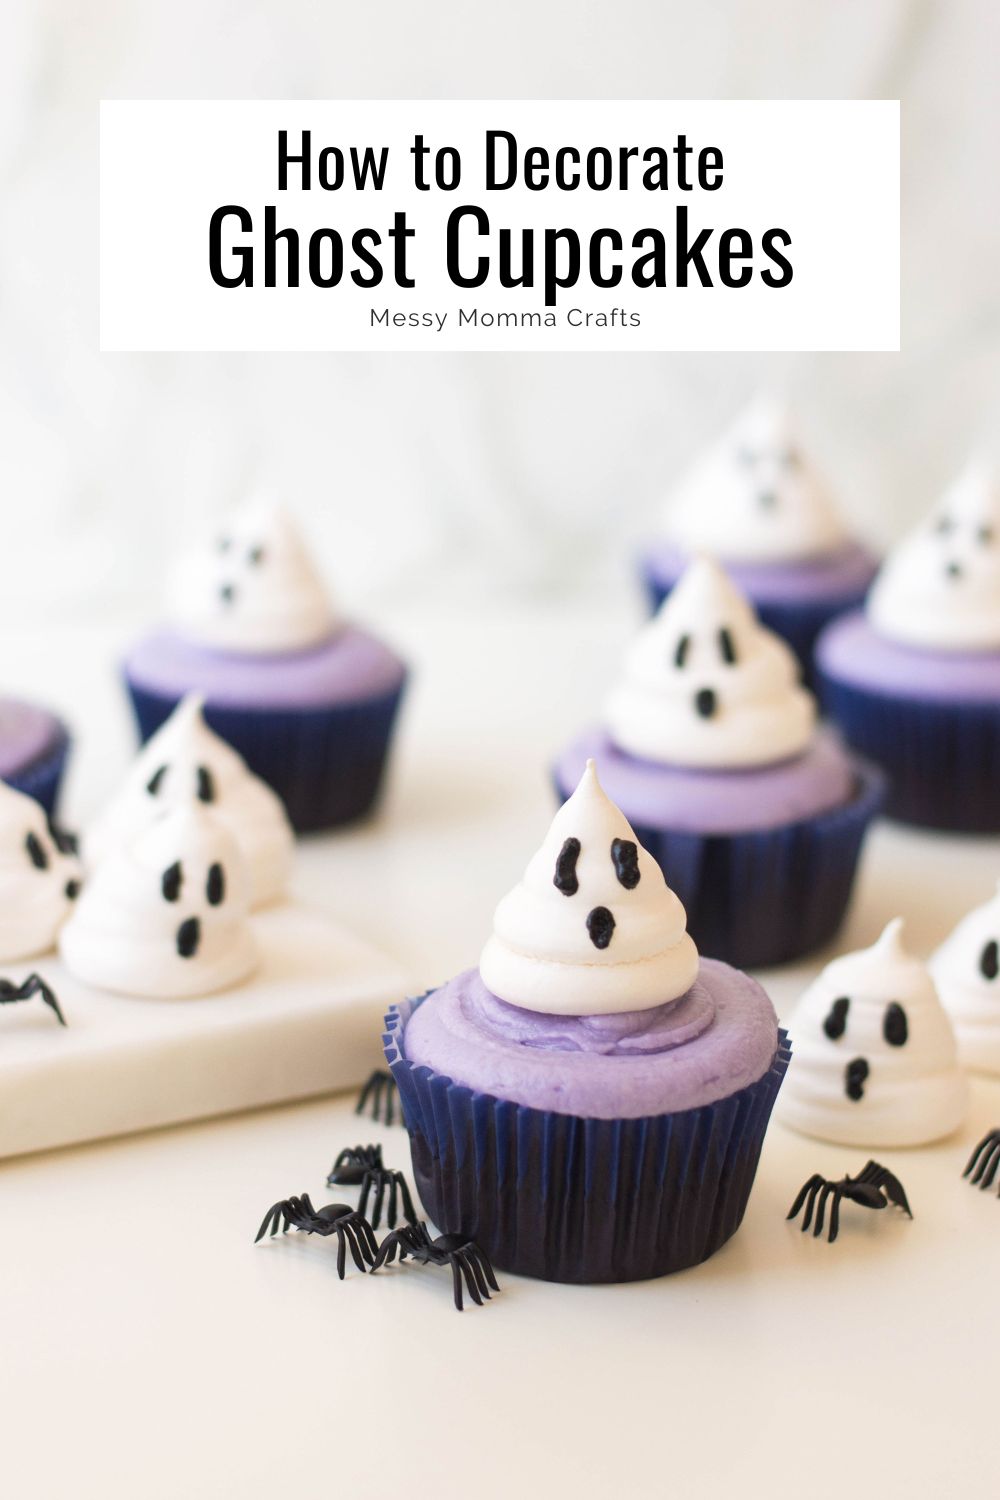 How to decorate ghost cupcakes.